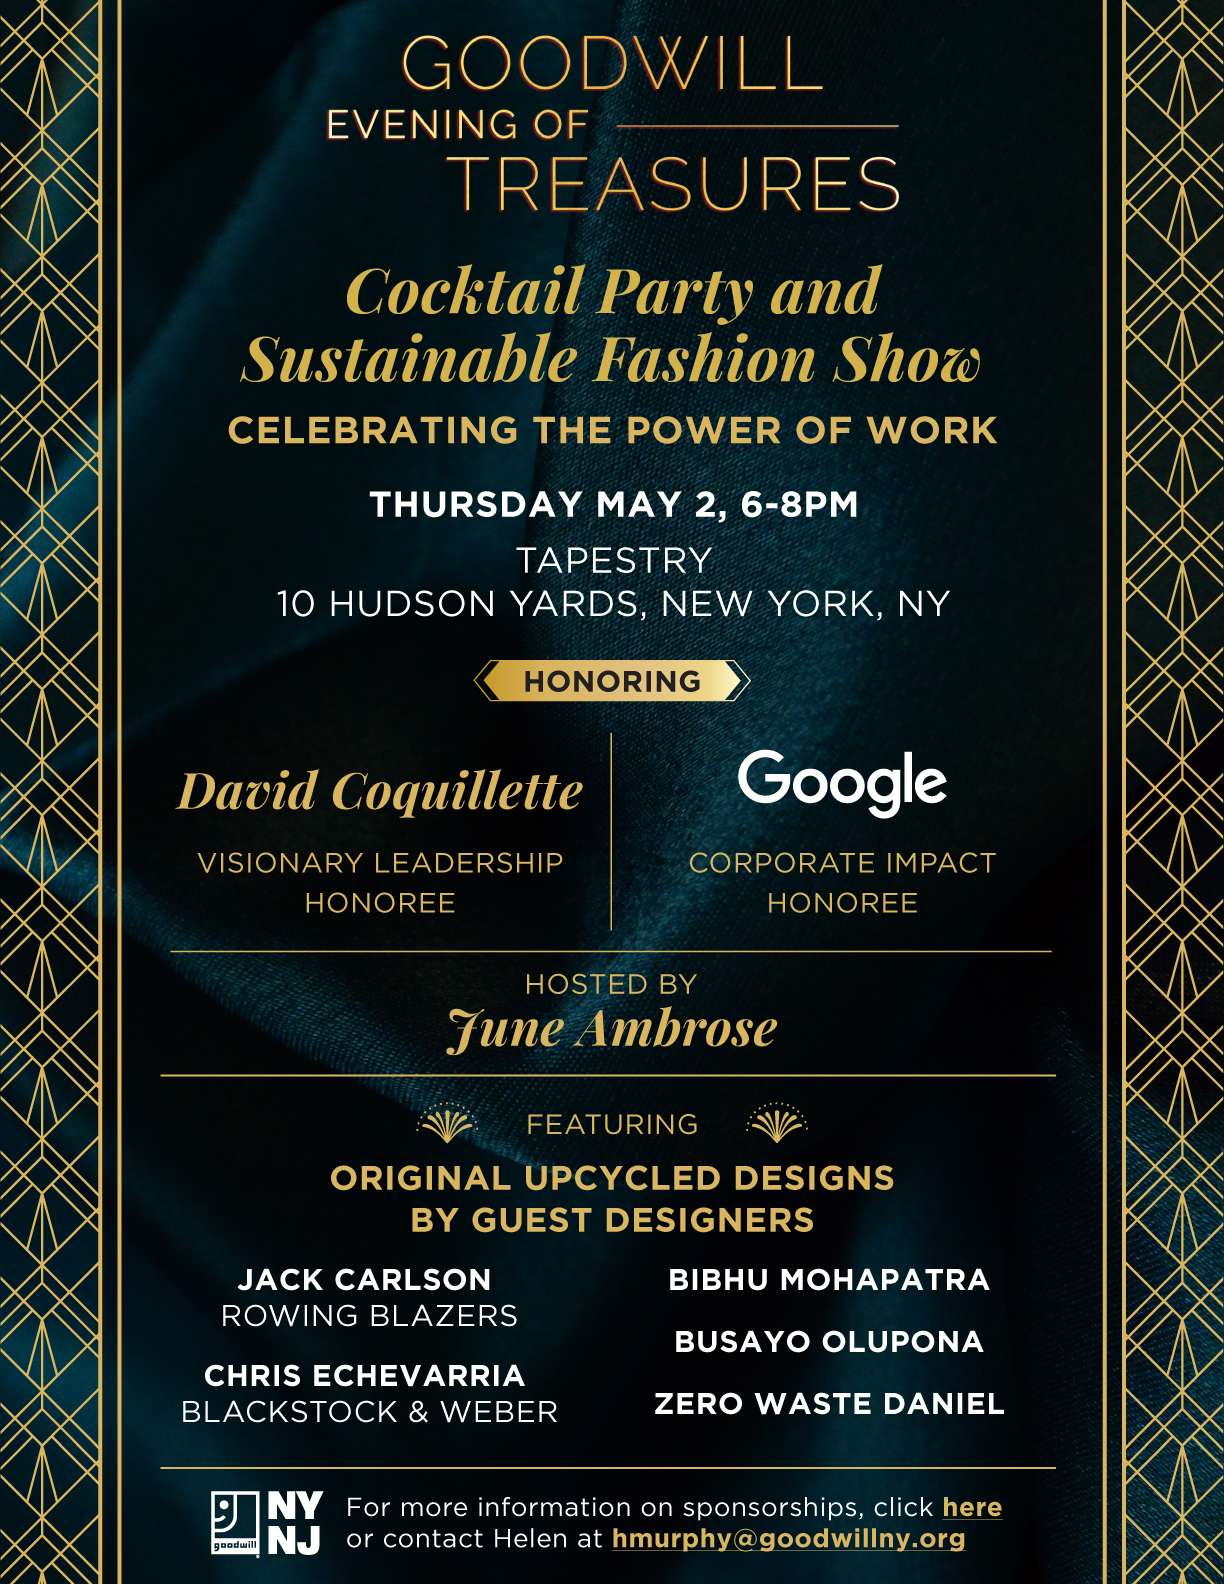 The image features a detailed invitation for a "GOODWILL EVENING OF TREASURES Cocktail Party and Sustainable Fashion Show." The event celebrates the power of work, is hosted by June Ambrose, and honors David Coquillette. It is scheduled for Thursday, May 2, from 6-8 PM at Tapestry, 10 Hudson Yards, New York, NY. The invitation also highlights original upcycled designs by guest designers including Jack Carlson of Rowing Blazers, Chris Echevarria of Blackstock & Weber, Zero Waste Daniel, and Bibhu Mohapatra. The background has a luxurious dark blue fabric with golden text and accents, and there's a reference for more information on sponsorships.